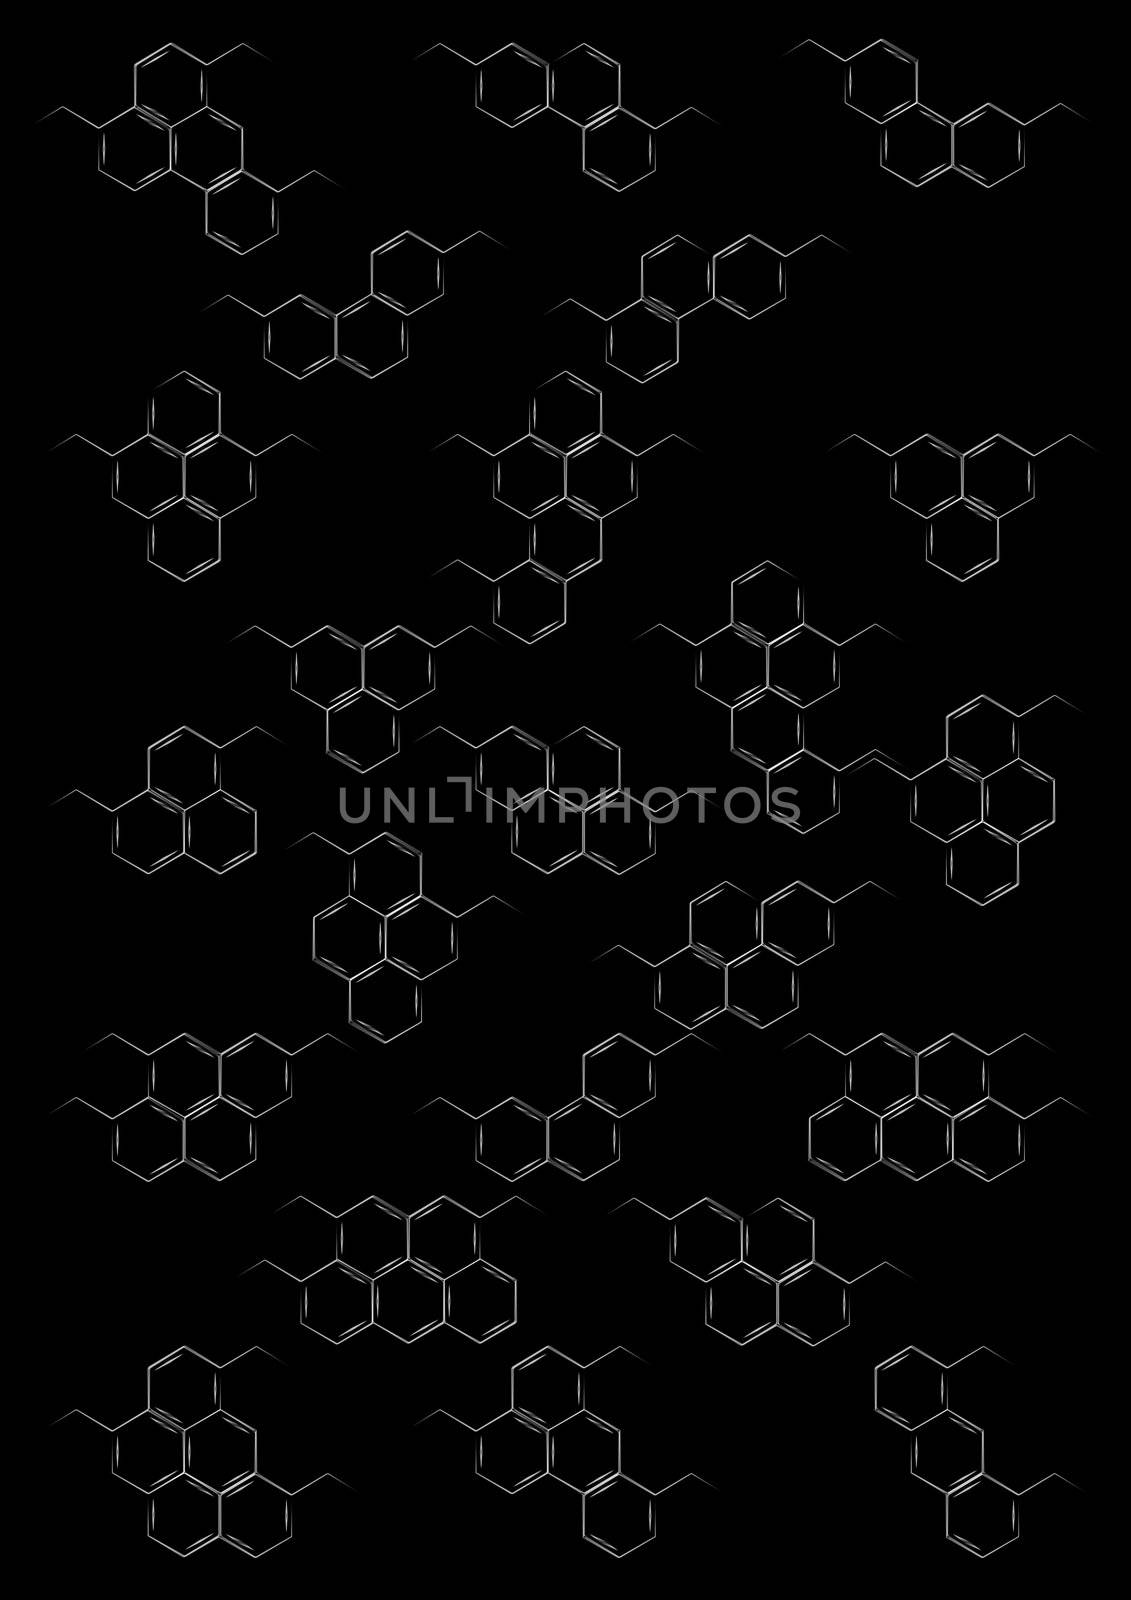 Blackboard with structural chemical formulas of benzene rings